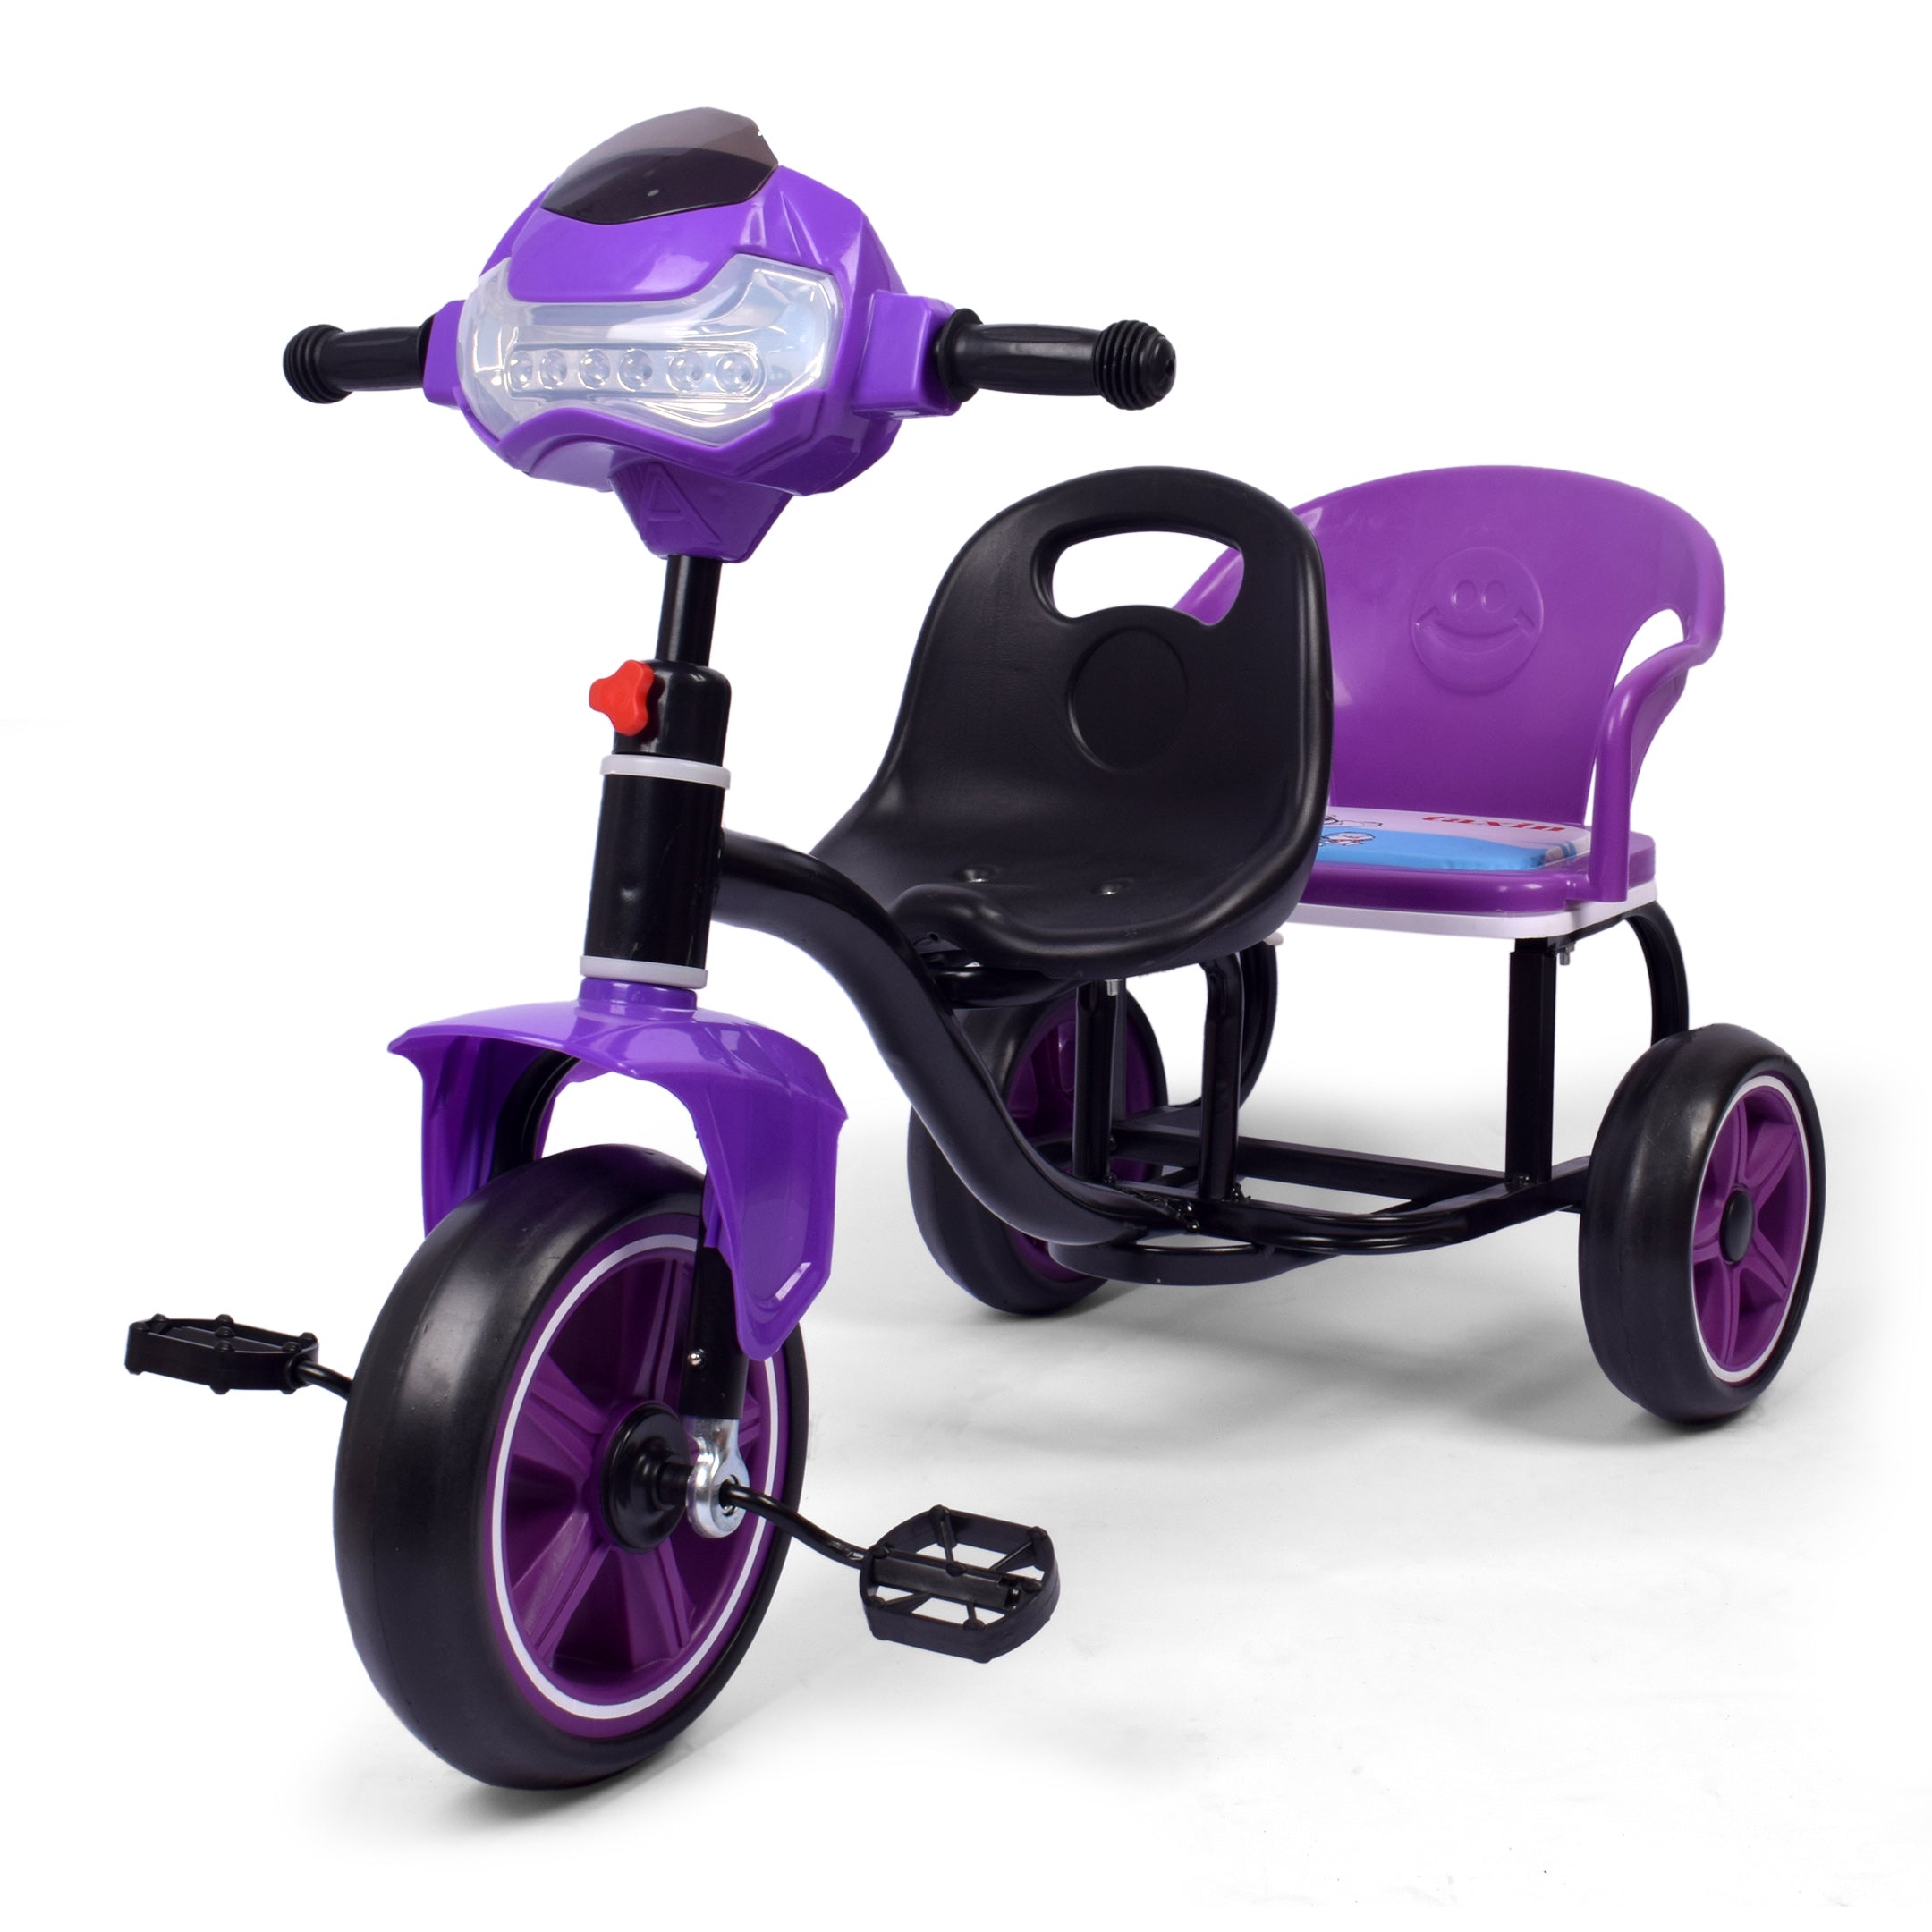 Kids Car Shape Twin Seater Tricycle - Purple